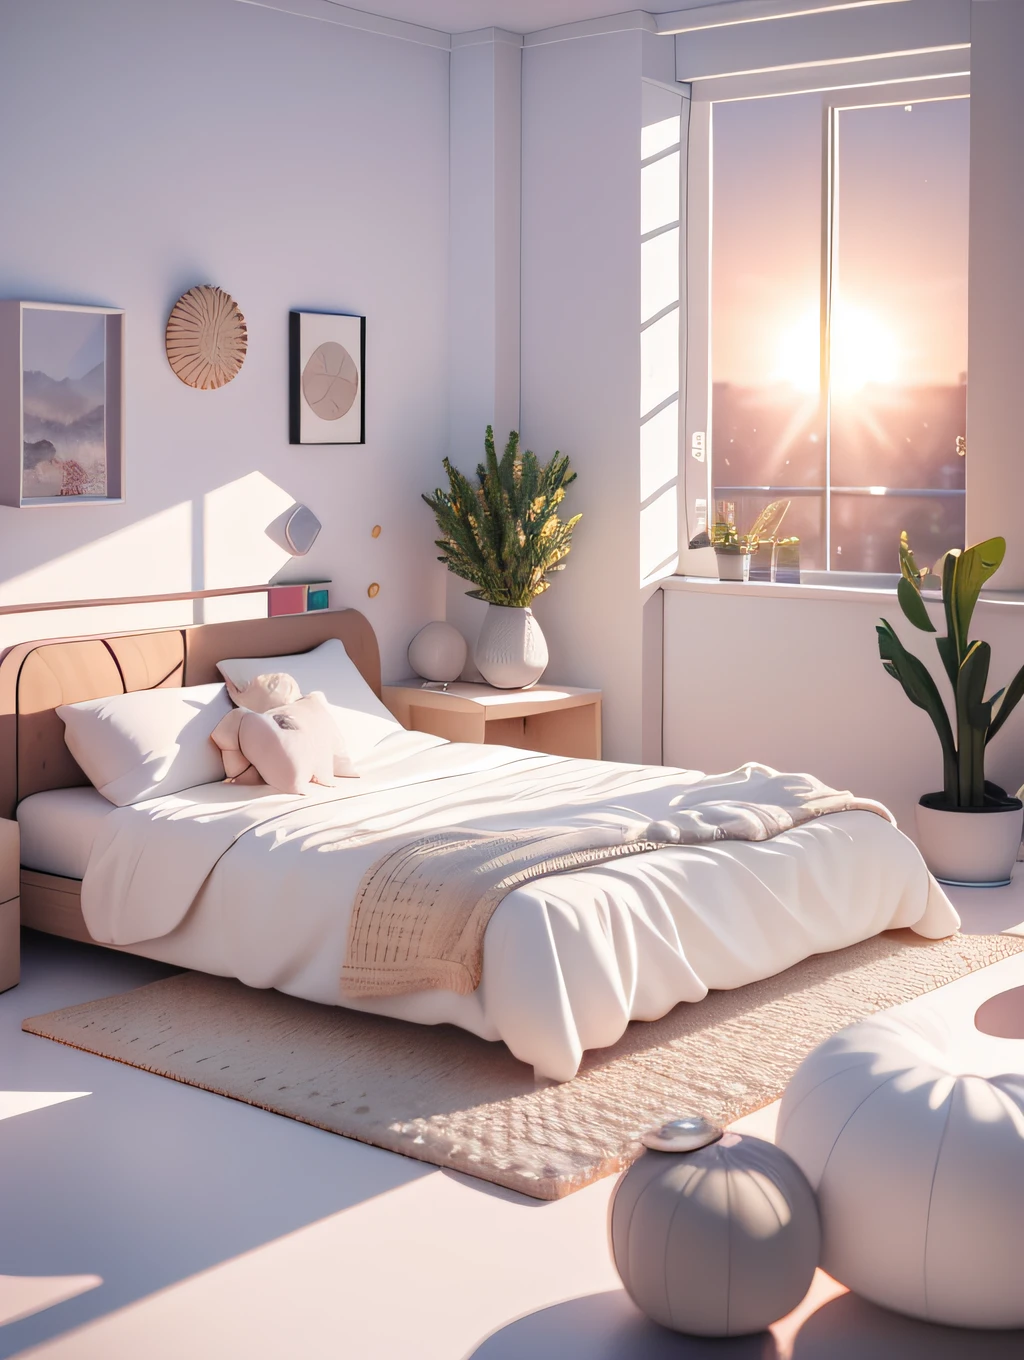 liveroom，sofe，hugging pillow，picure，decor，terrazzo，the setting sun，scenecy，inside in room，4k，tmasterpiece，A high resolution，extremly intricate）（realisticlying：1.4），3D clay rendering，White background，c4d